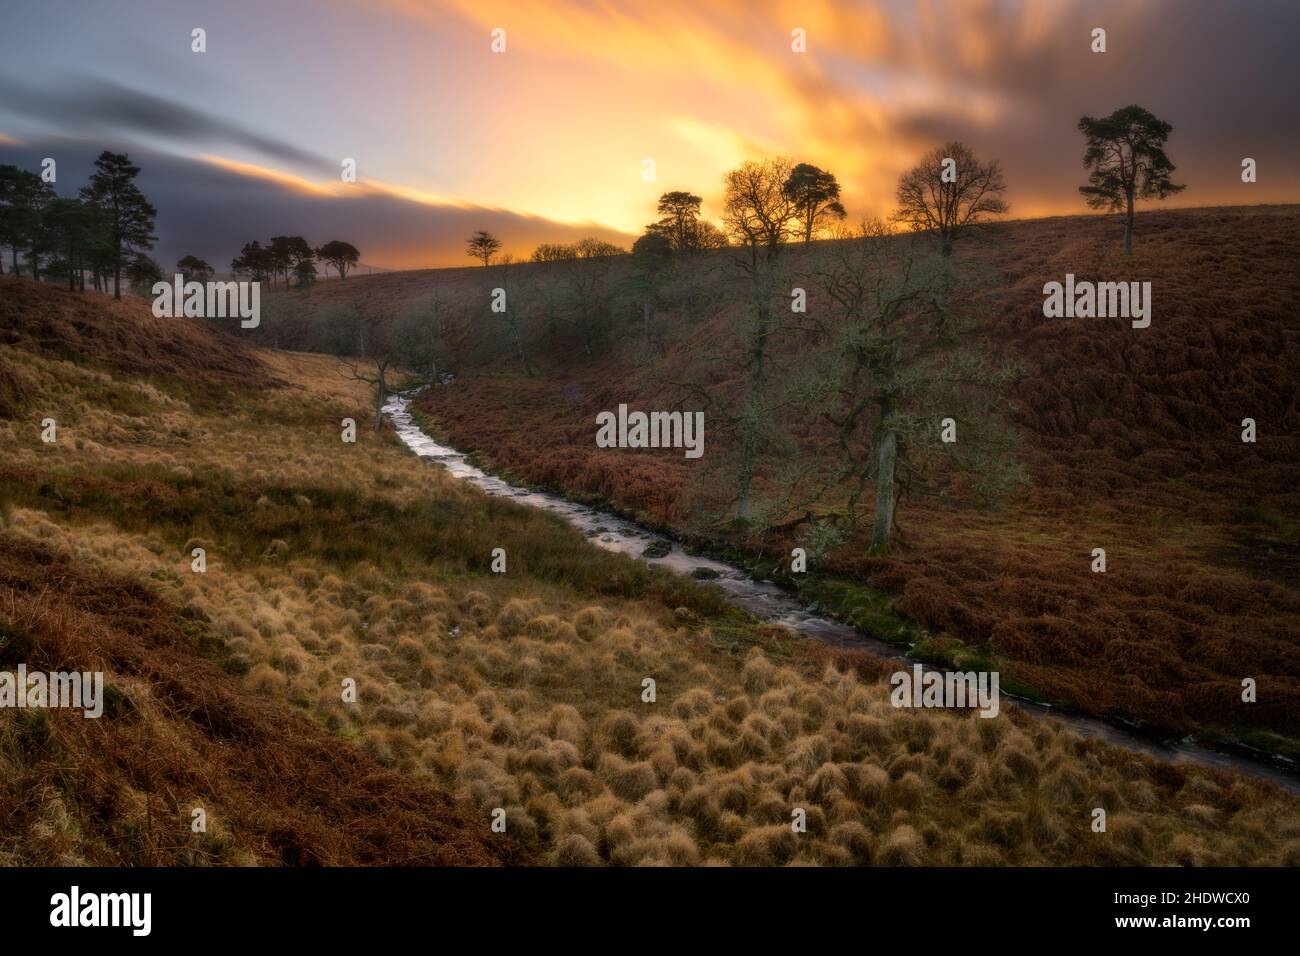 Landscape with river in the mountains, Ireland Stock Photo